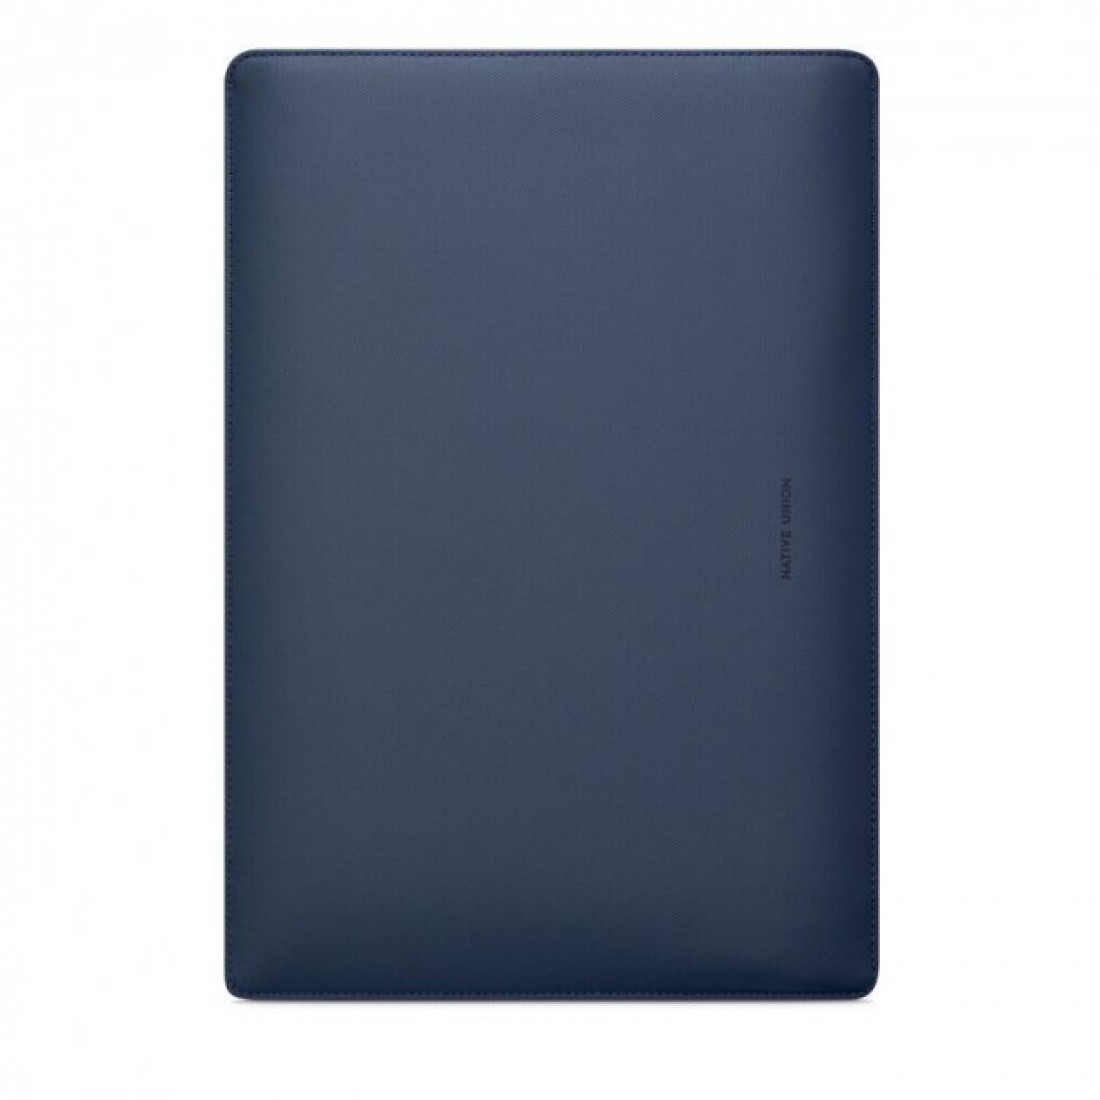 Native Union Stow Slim Sleeve Case Indigo for MacBook Pro 13" M1/M2/MacBook Air 13" M1 (STOW-MBS-IND-FB-13)